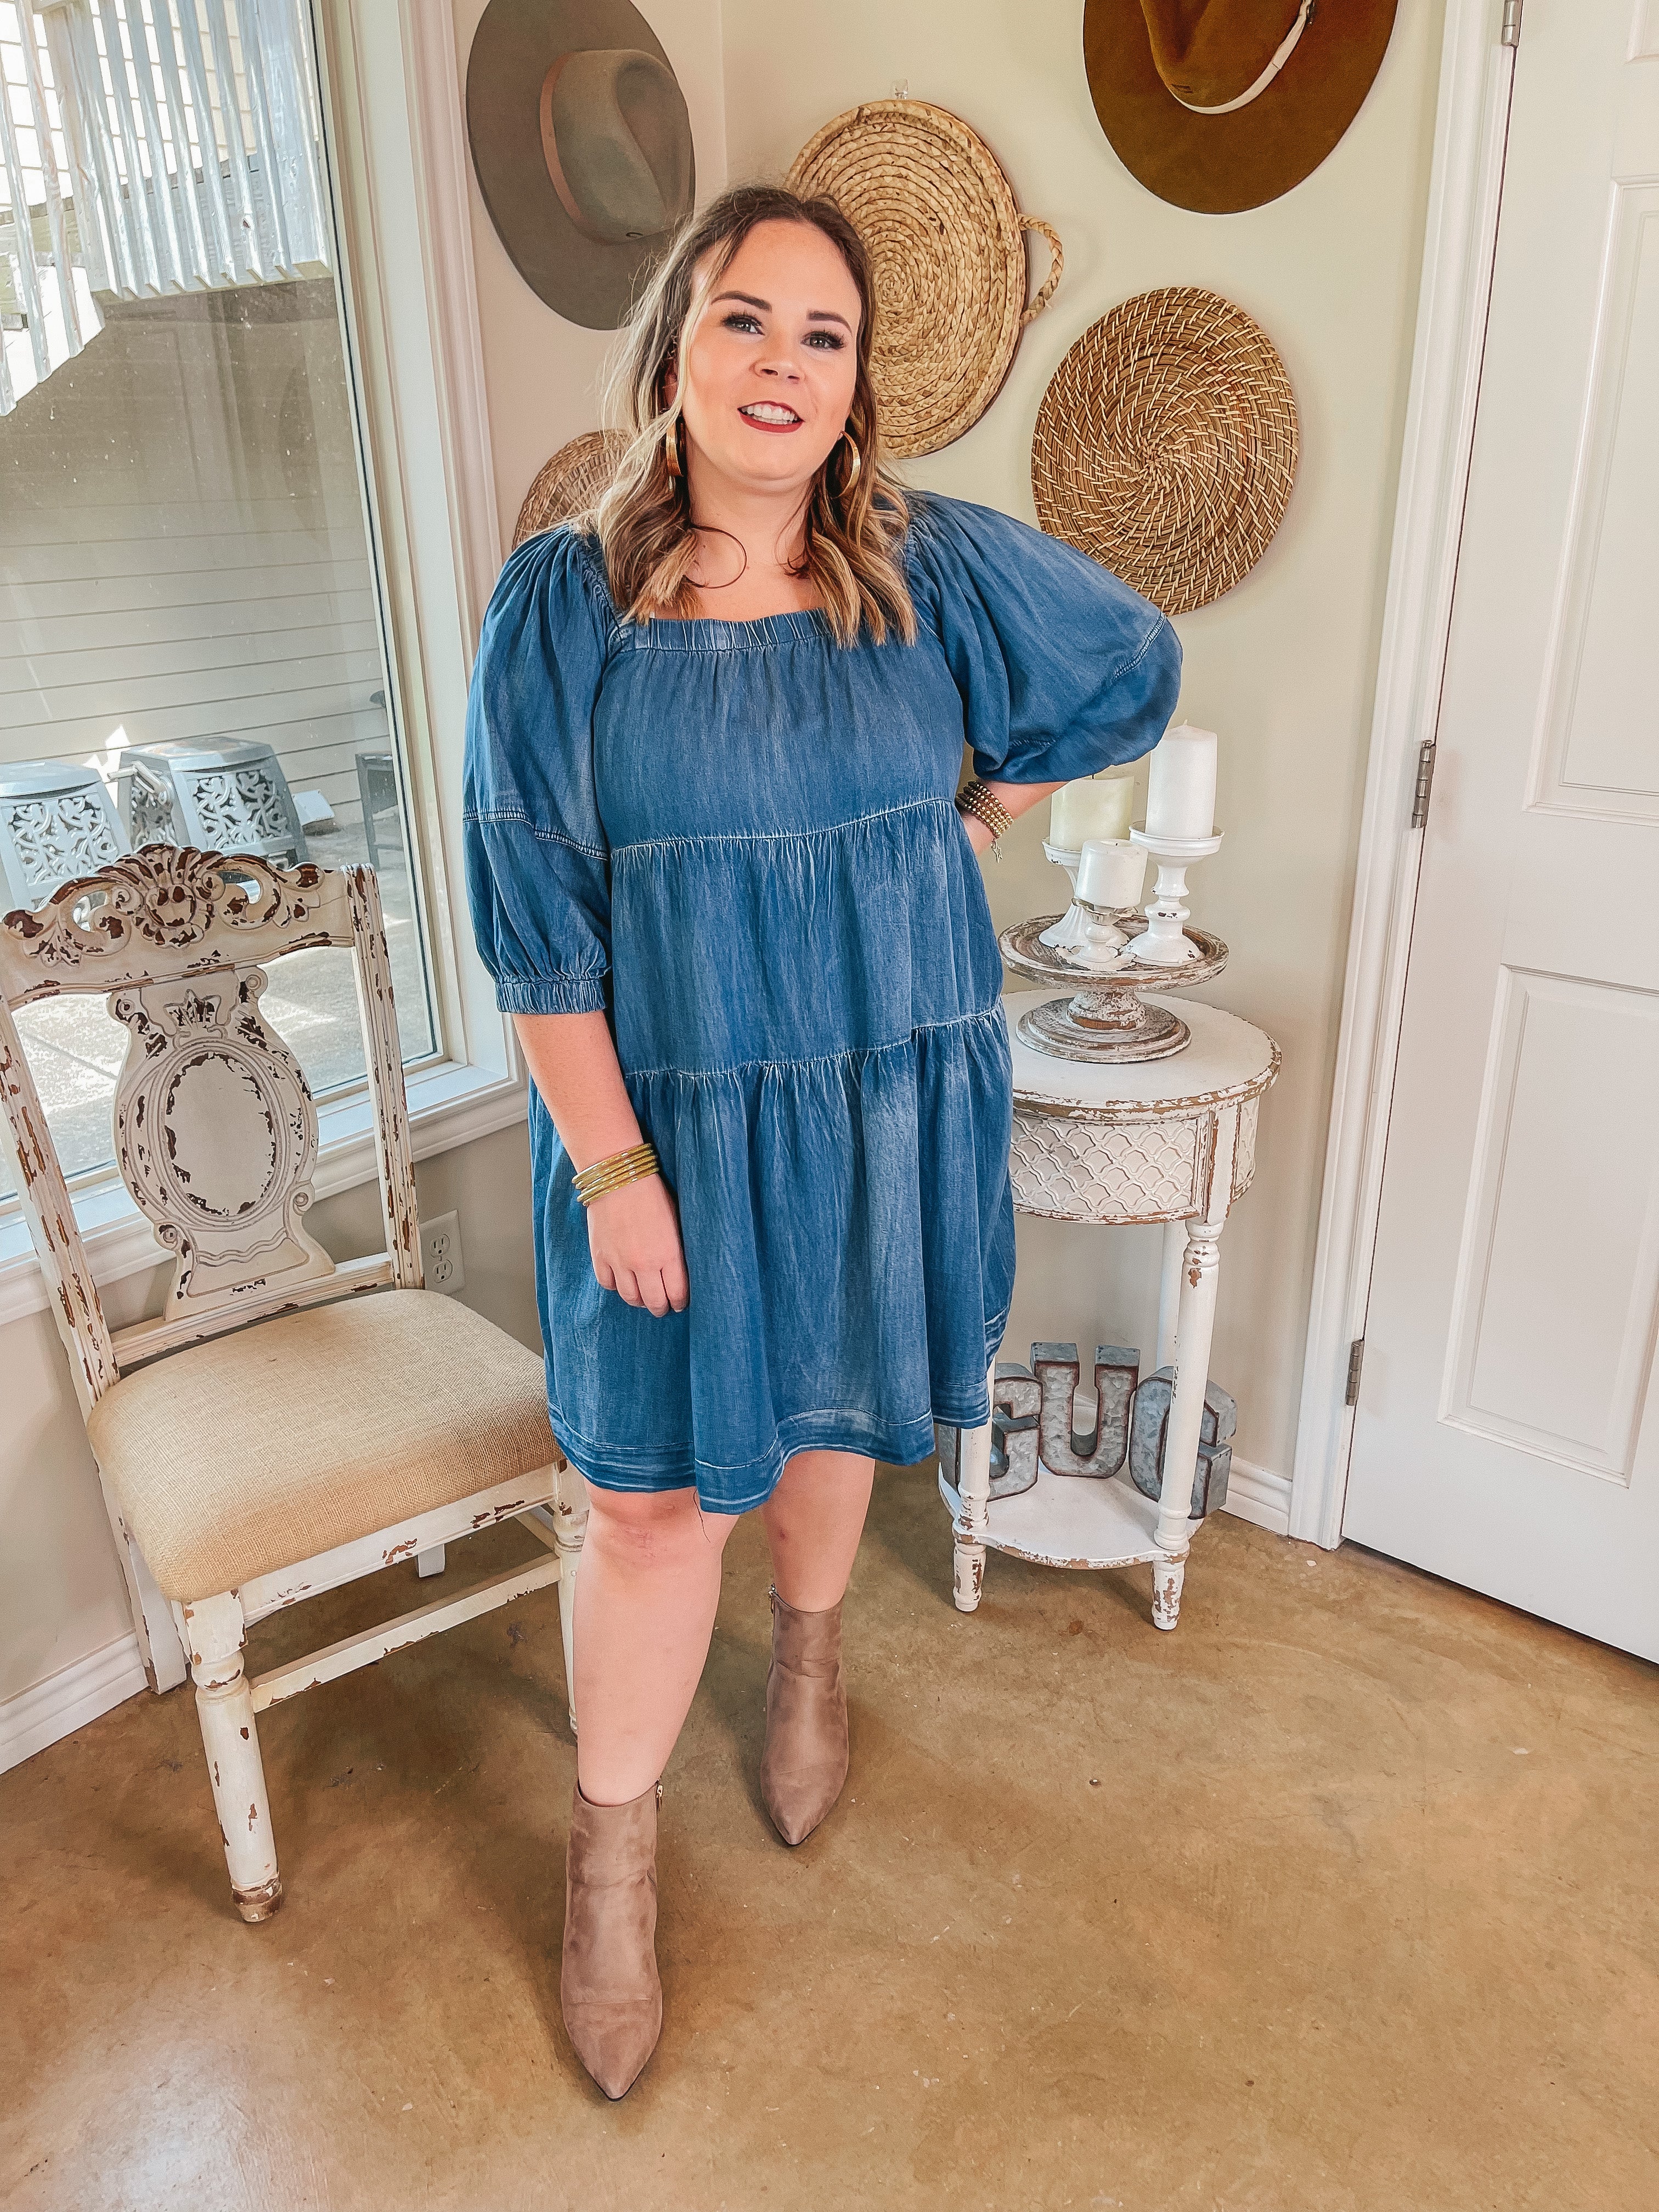 Wine Mixer Square Neck Chambray Tiered Dress in Dark Wash - Giddy Up Glamour Boutique